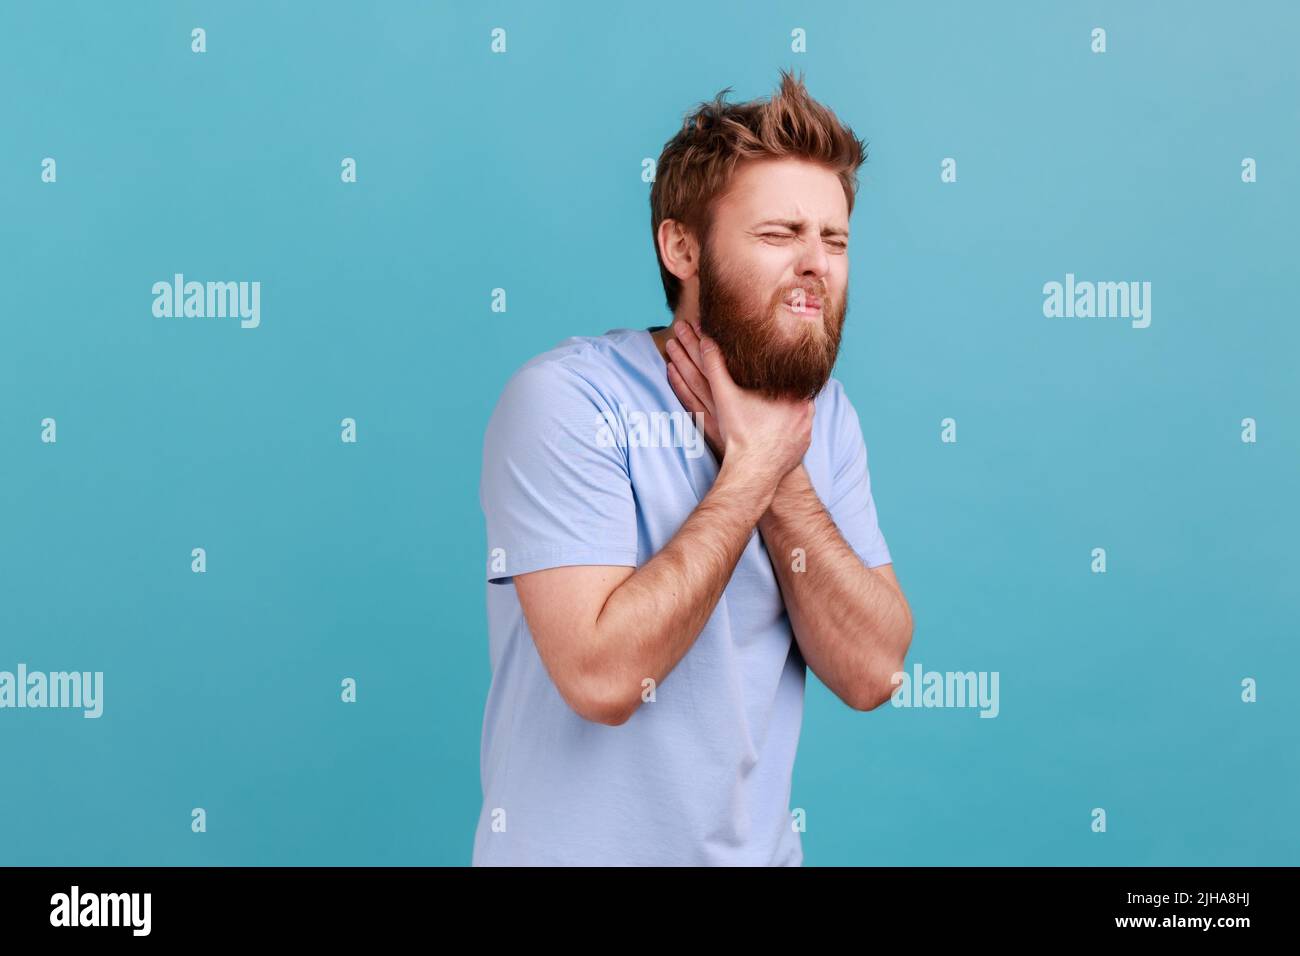 Portrait of bearded man grimacing touching his neck, feeling pain while swallowing, sore throat, risk of choking or anaphylactic shock. Indoor studio shot isolated on blue background. Stock Photo